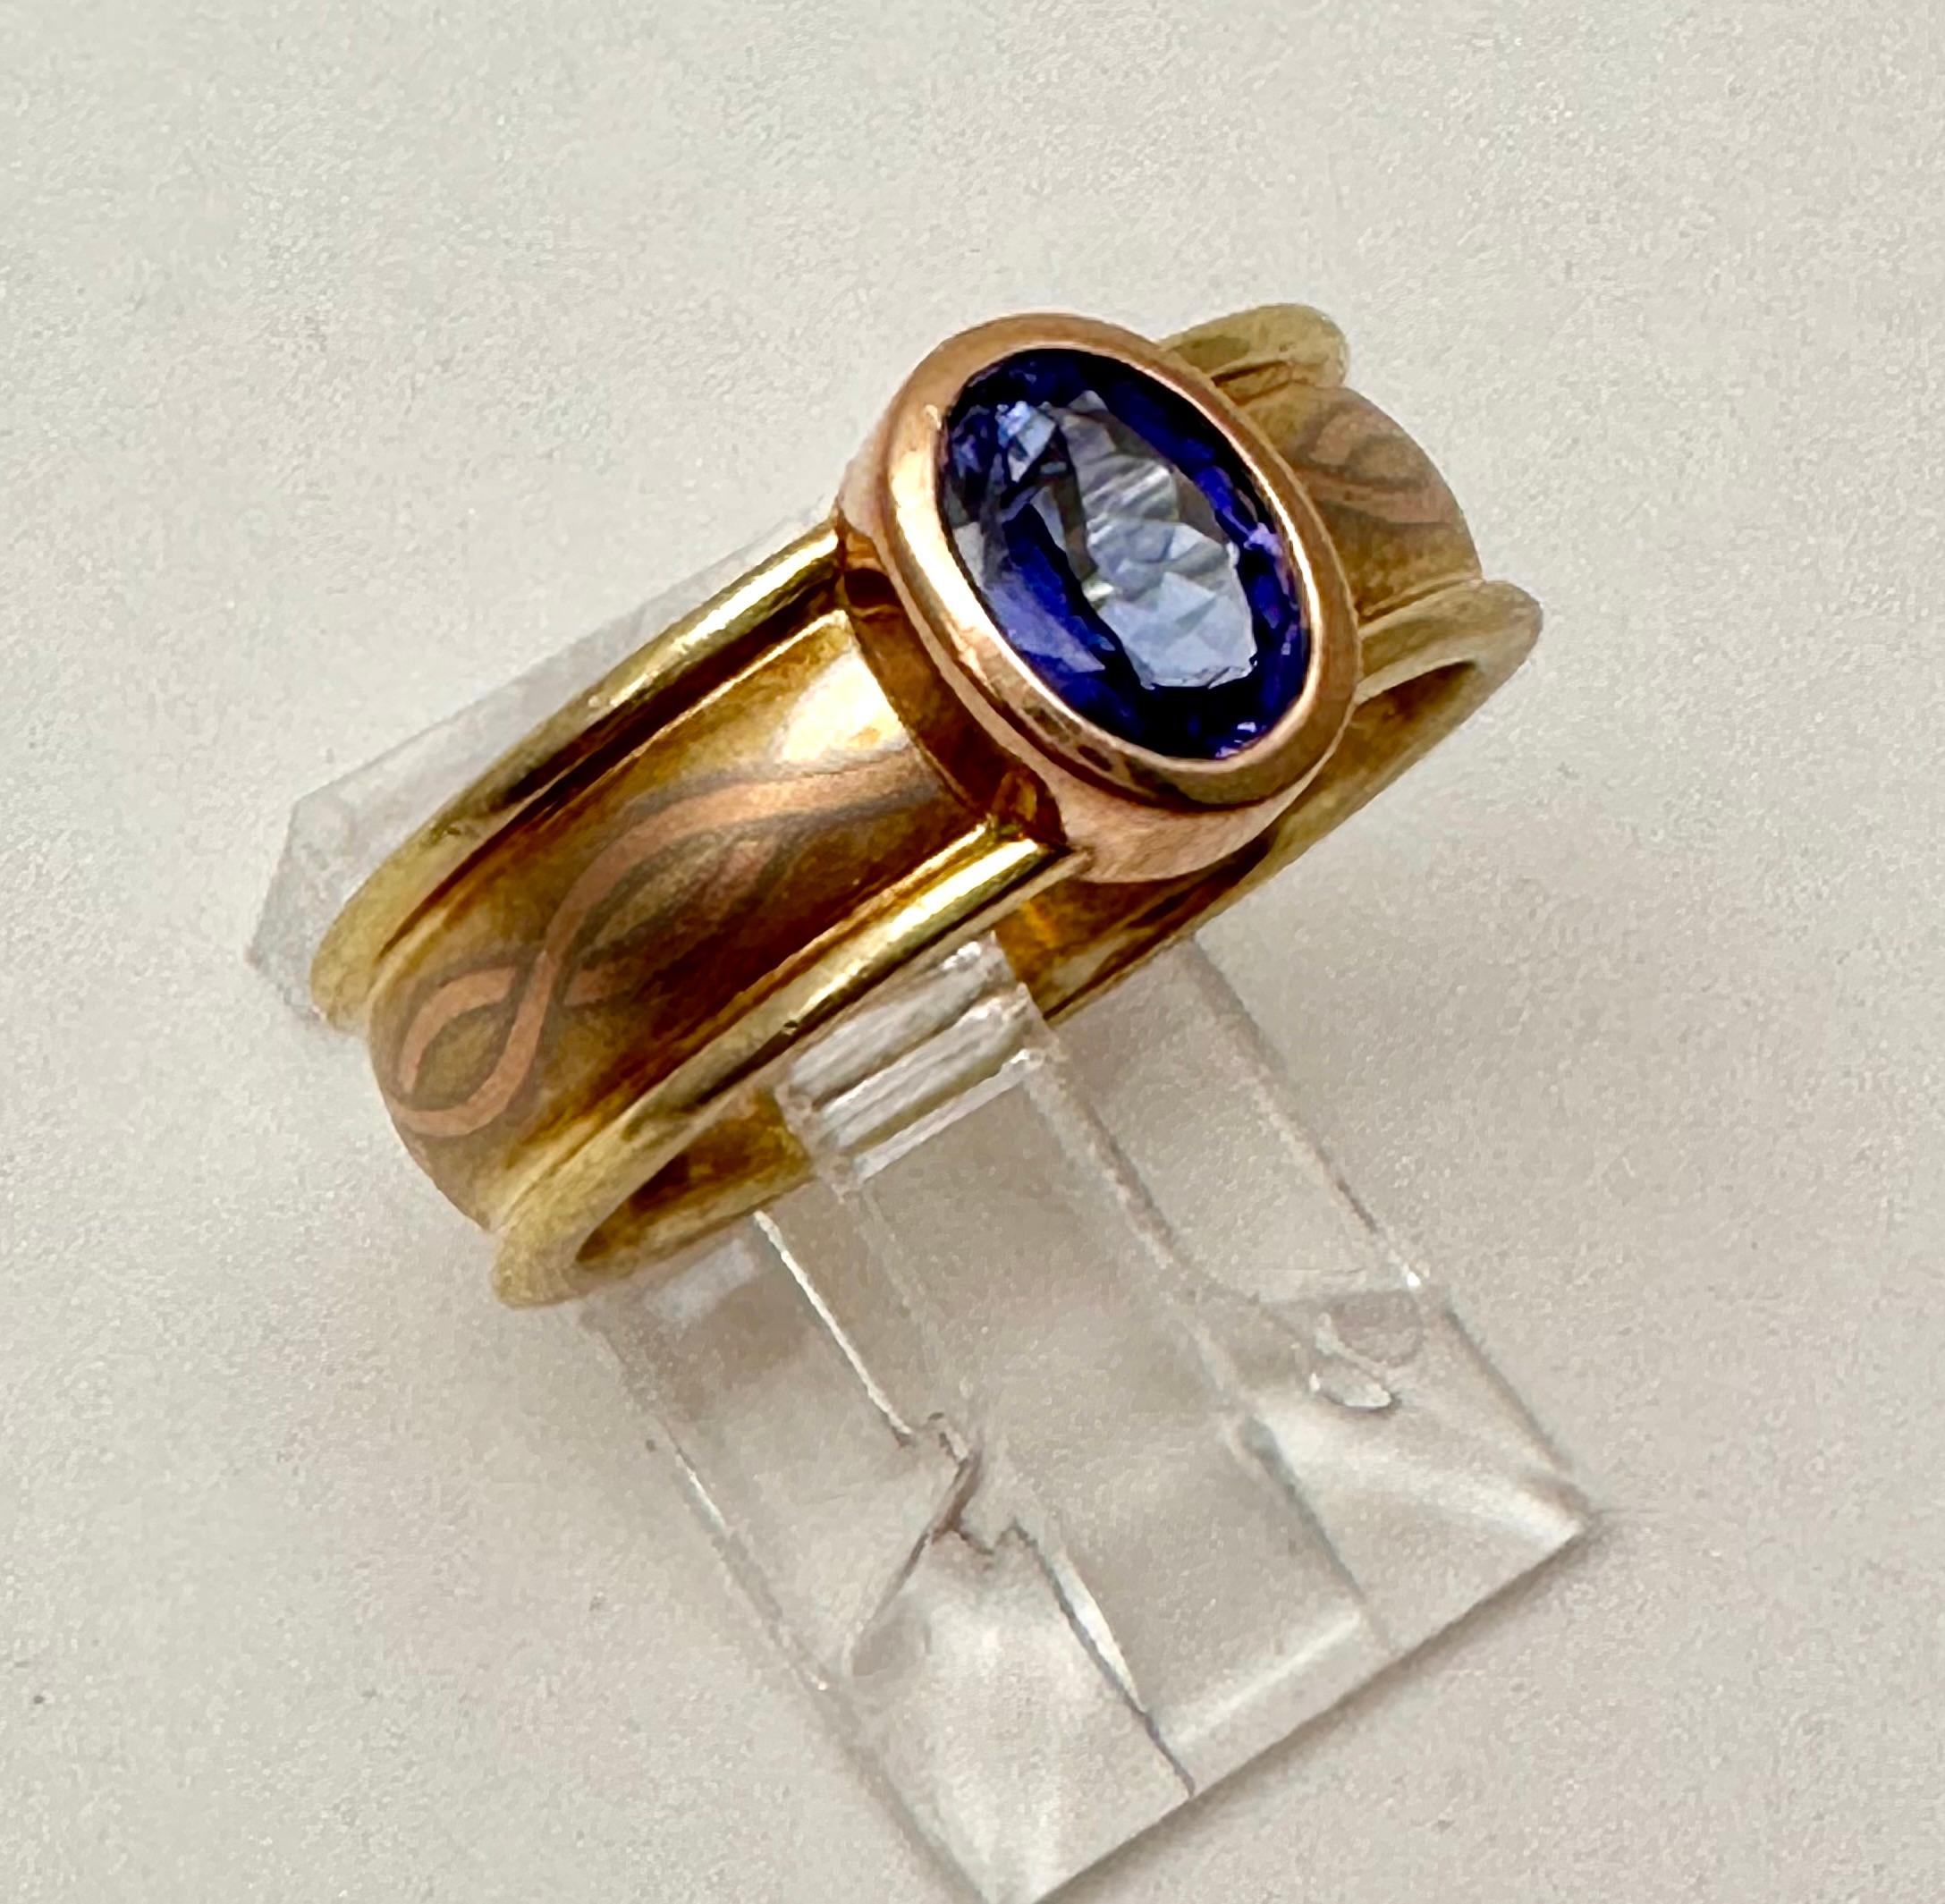 Modern 14k Yellow Gold 4.5mm x 6.5 Oval Cut Tanzanite Ring Size 7 For Sale